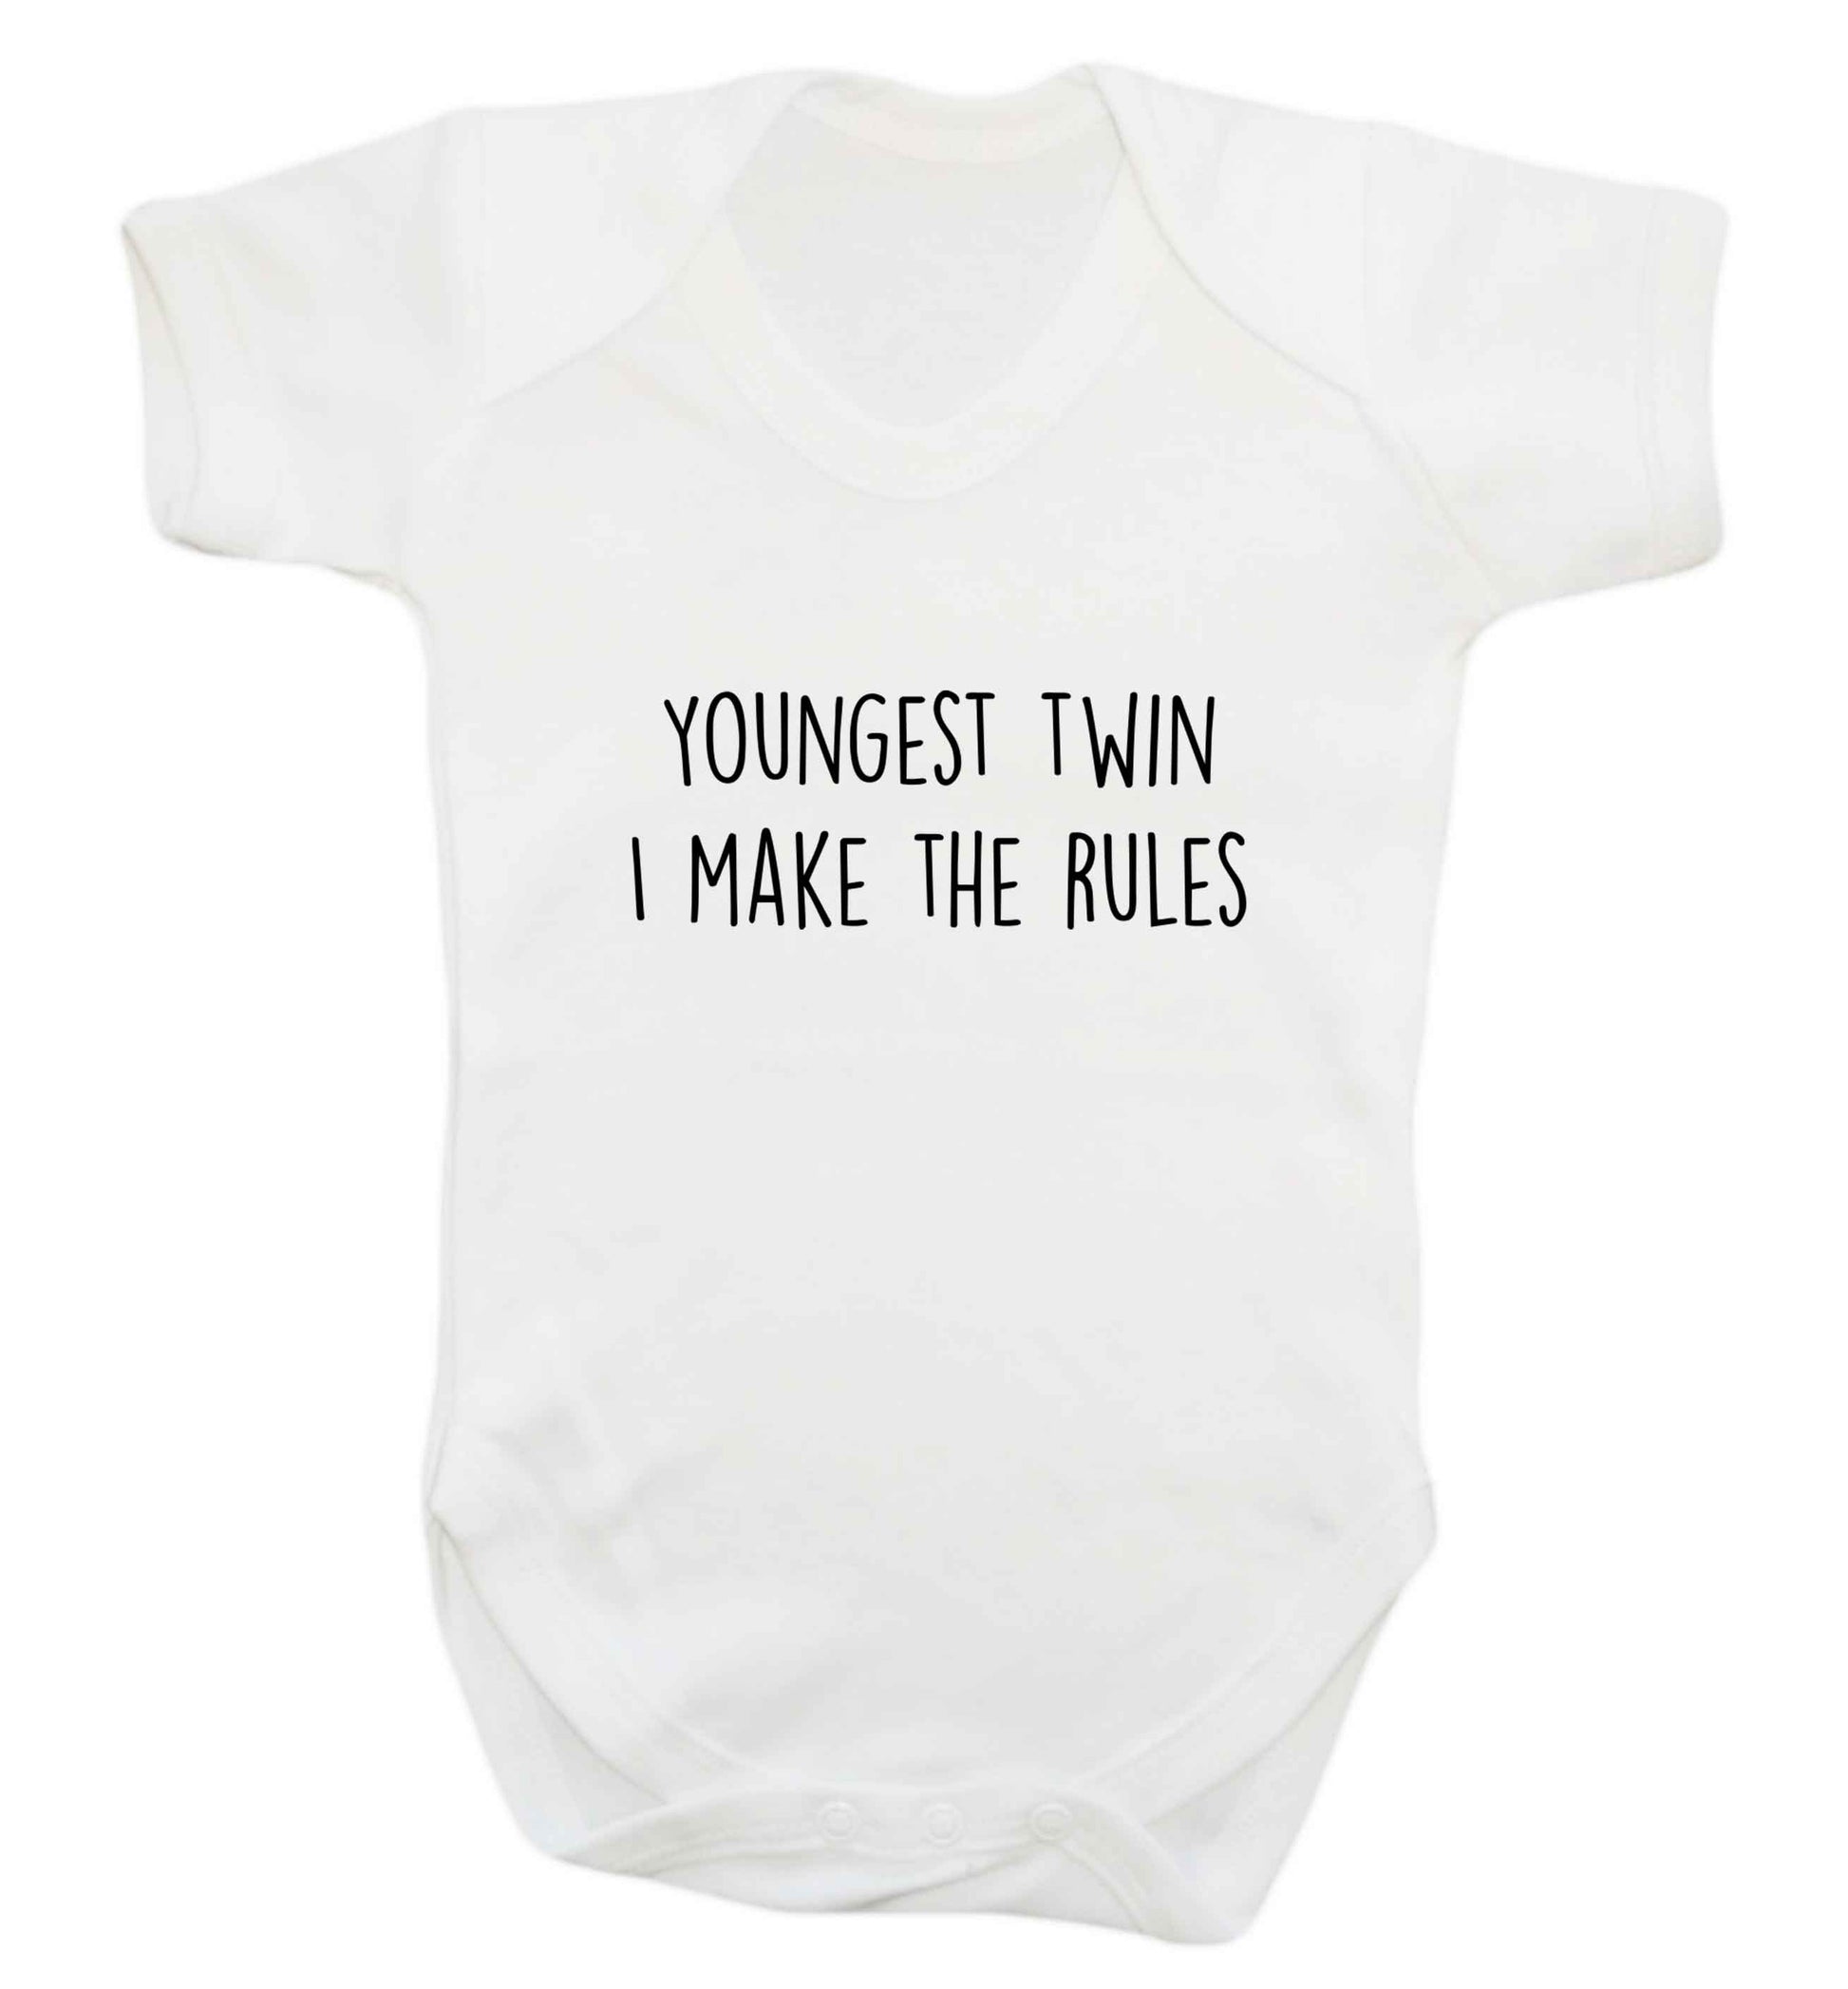 Youngest twin I make the rules baby vest white 18-24 months